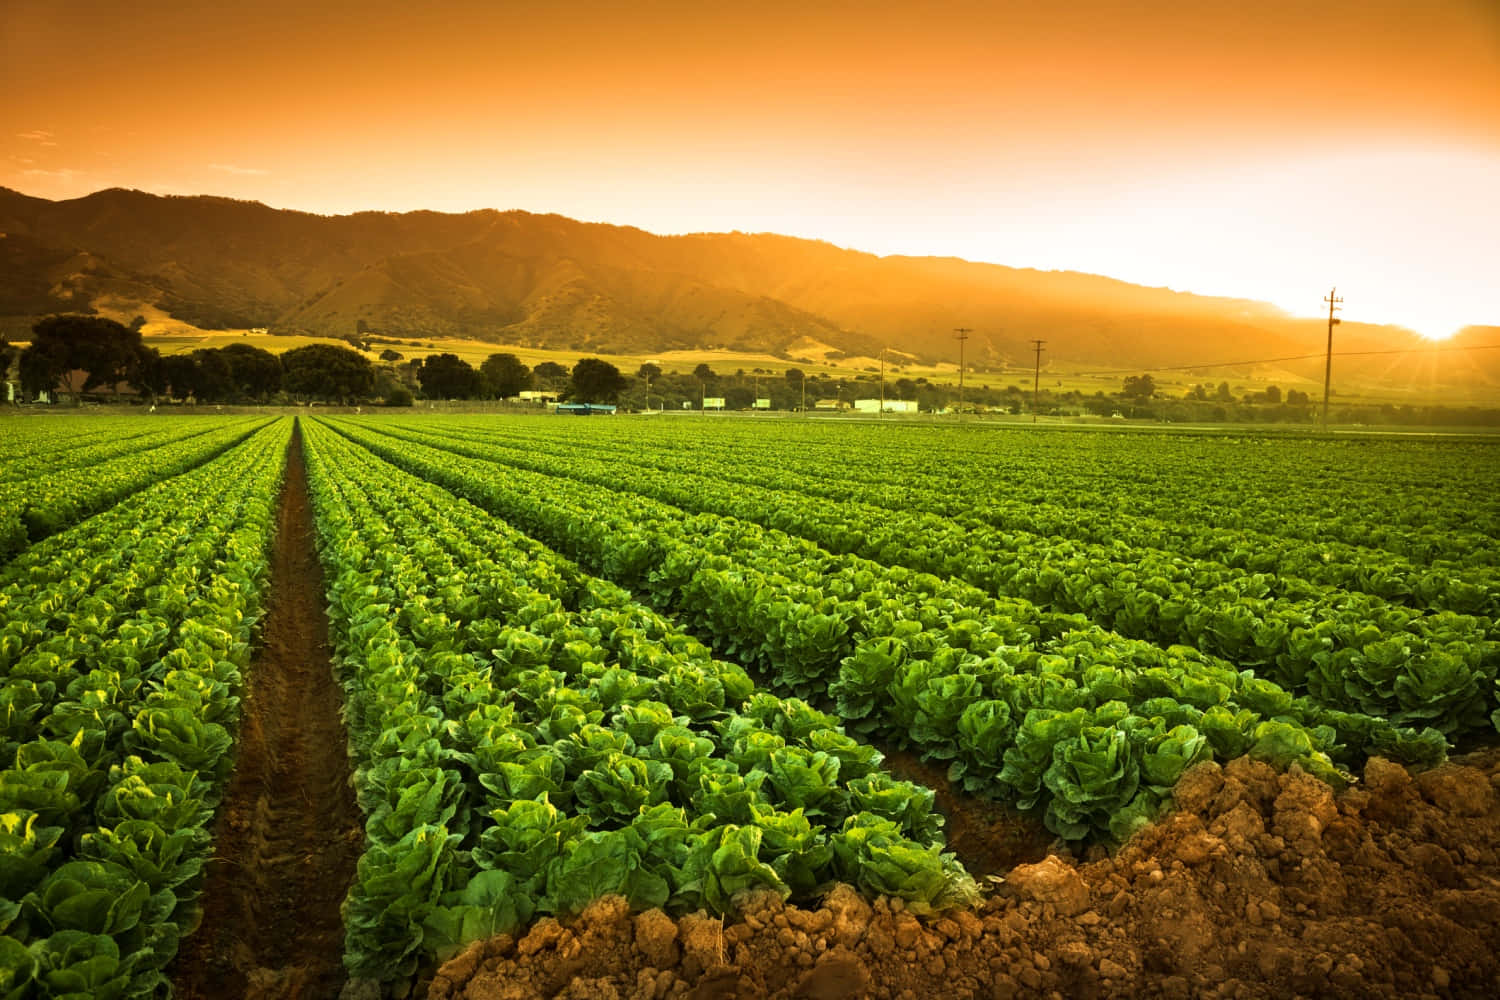 A Field Of Lettuce With Mountains In The Background